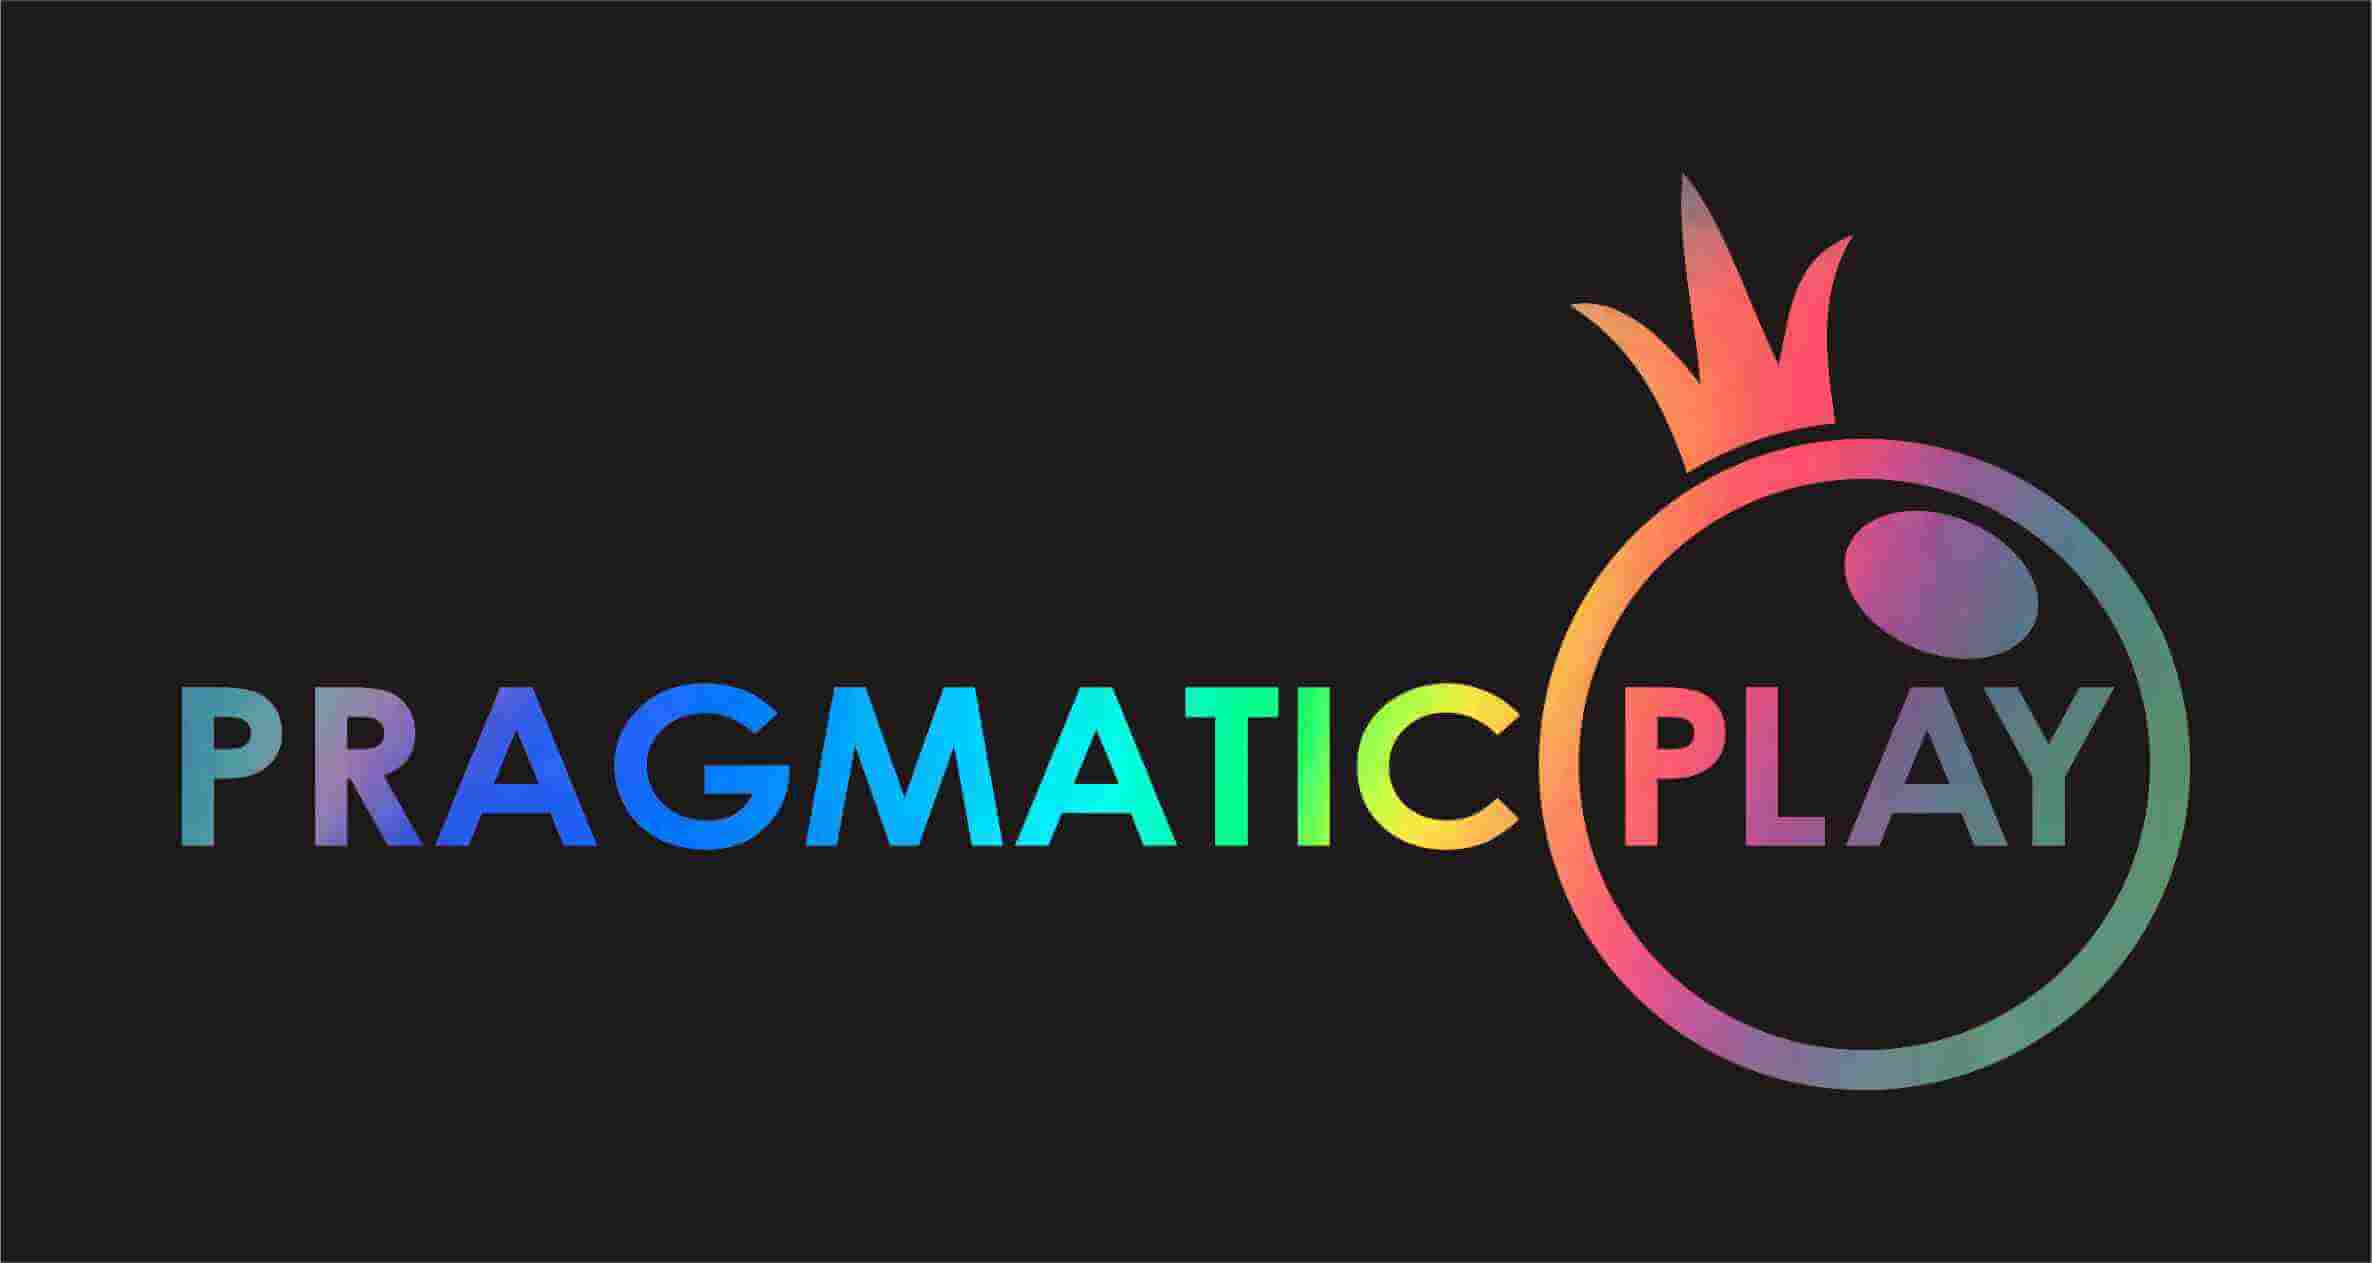 Pragmatic Play Introduces Engaging Jackpot Play to Top-Rated Games